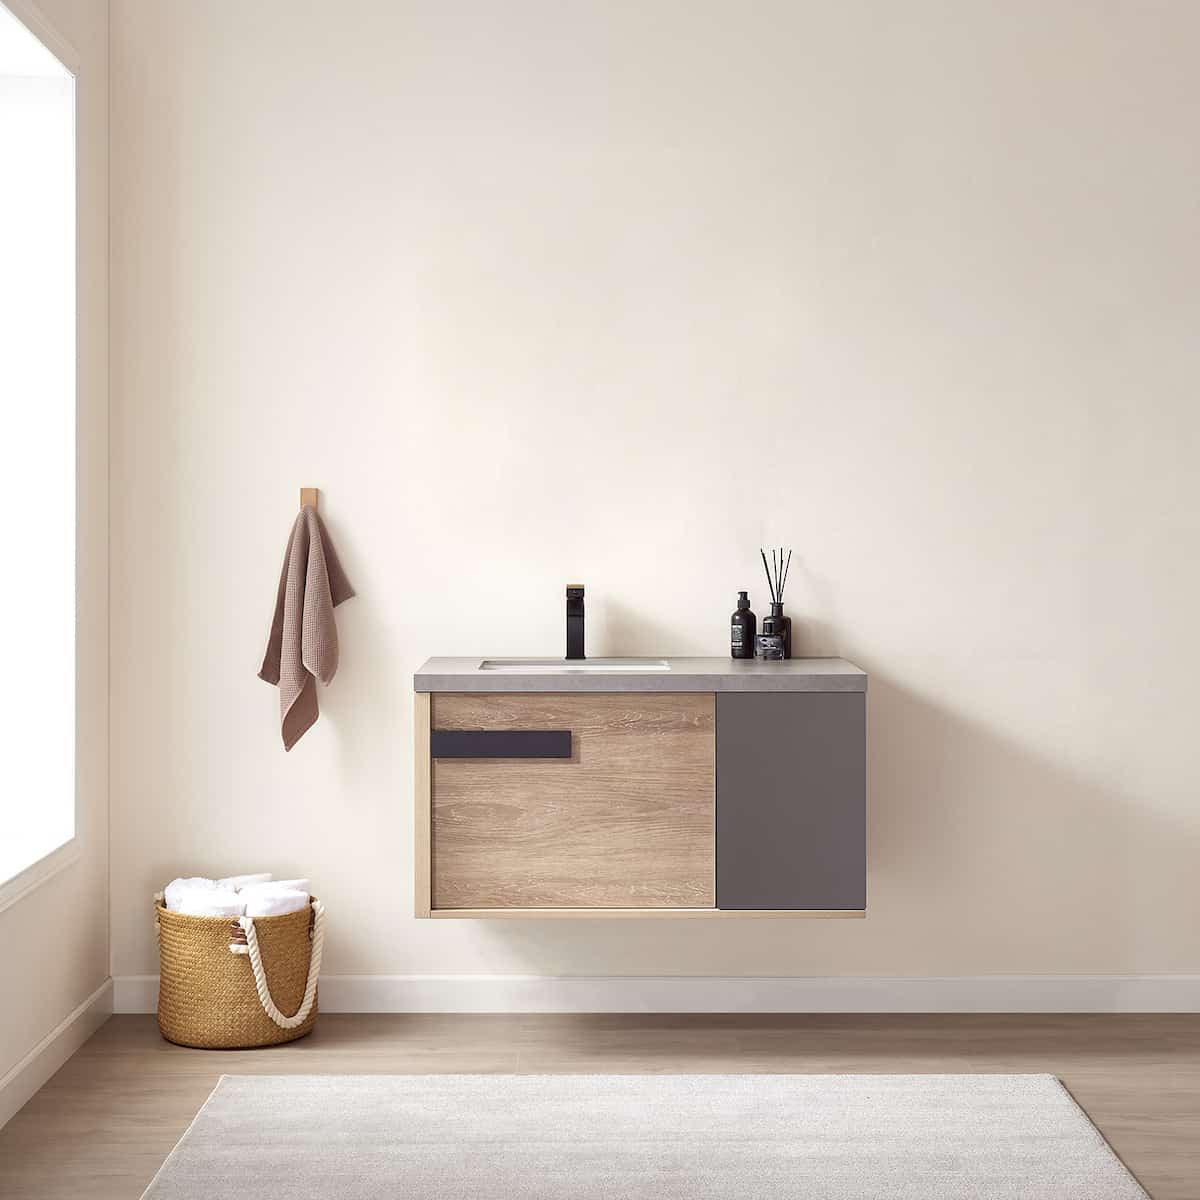 Vinnova Carcastillo 40 Inch Wall Mount Single Vanity in North American Oak with Grey Sintered Stone Top Without Mirror in Bathroom 703240-NO-WK-NM